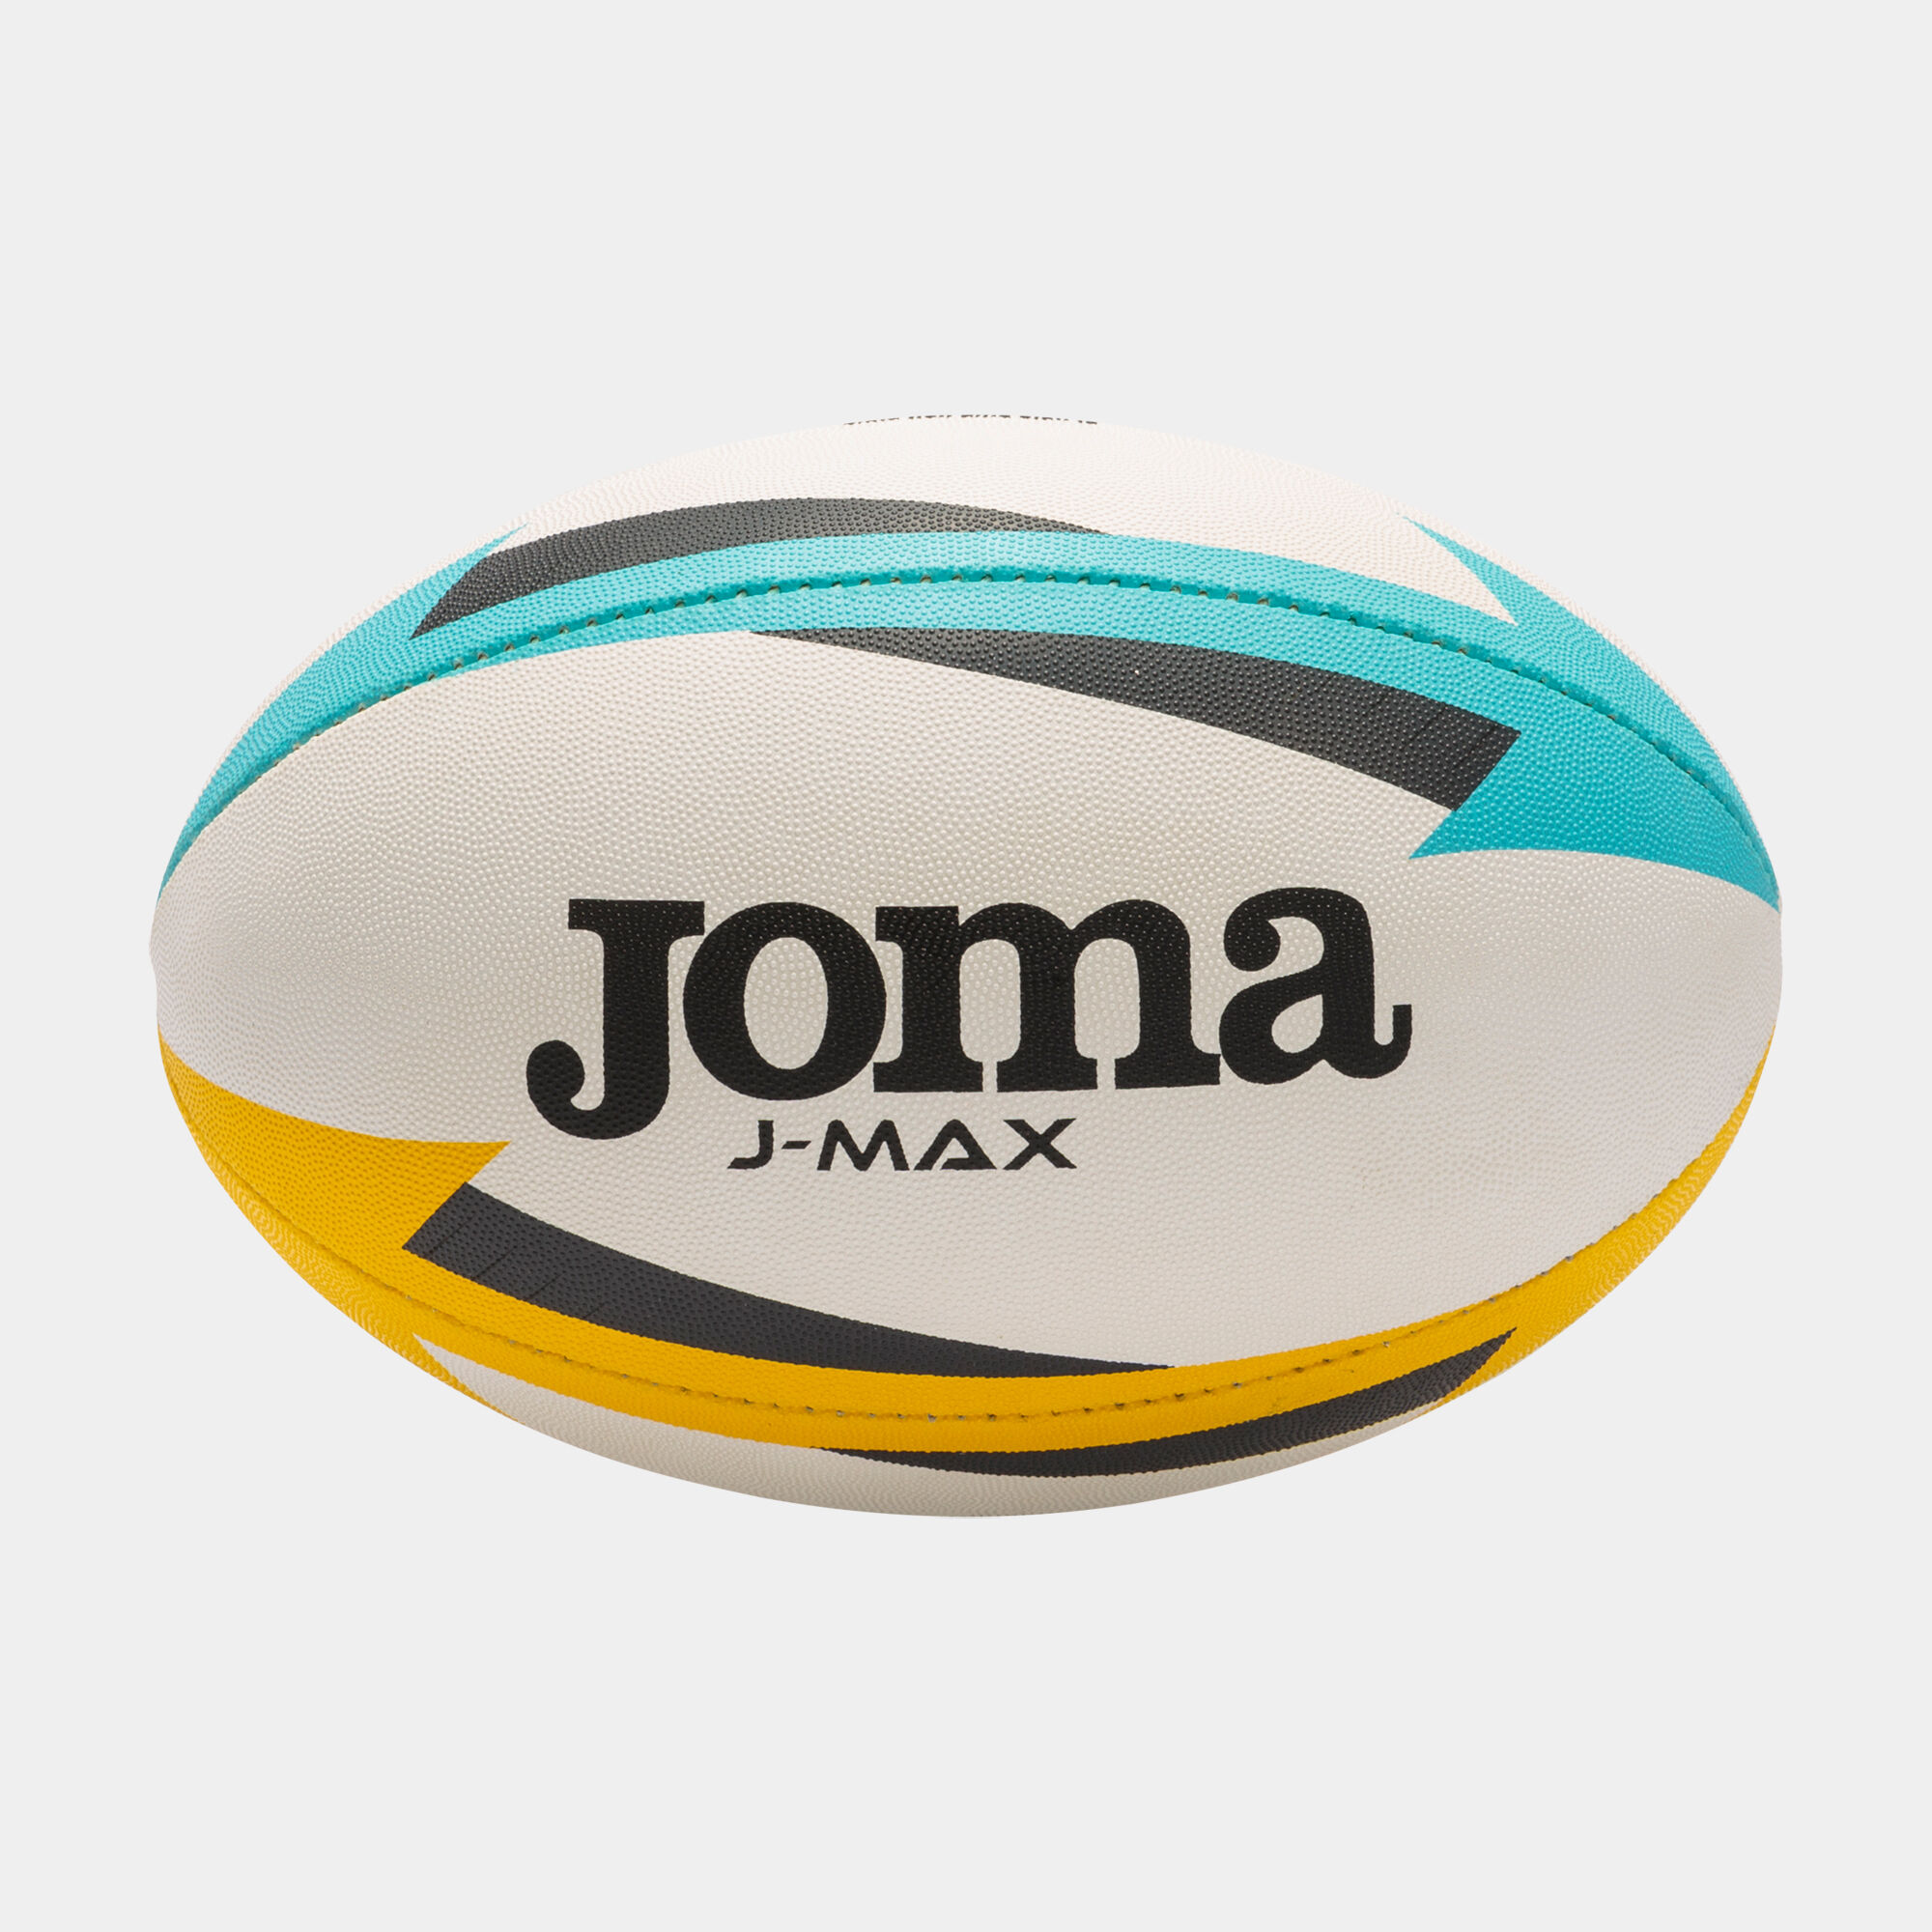 Rugby ball J-Max white yellow blue JOMA®